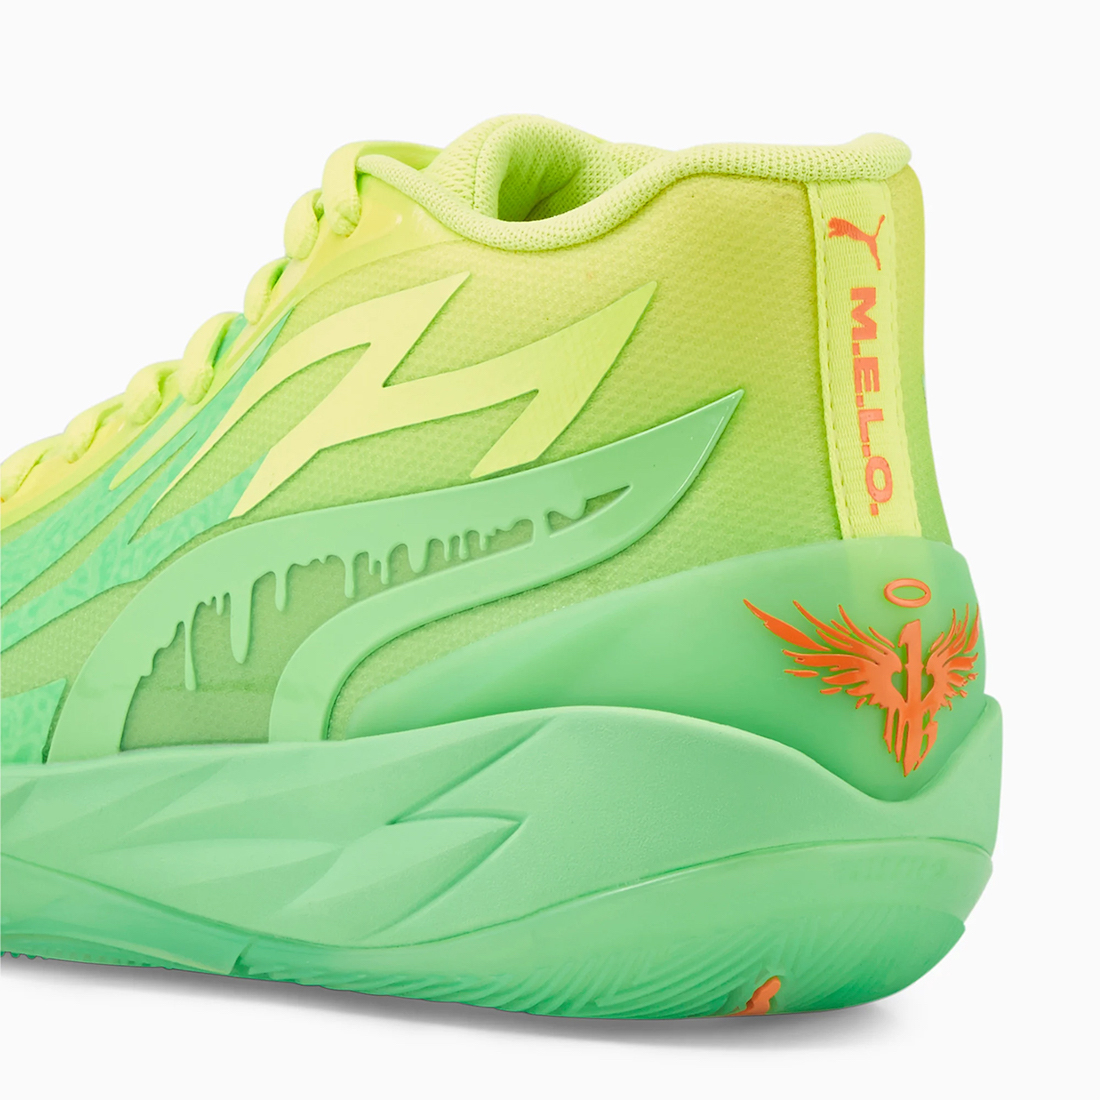 Nickelodeon Puma MB.02 Slime 377584-01 Release Date Lateral